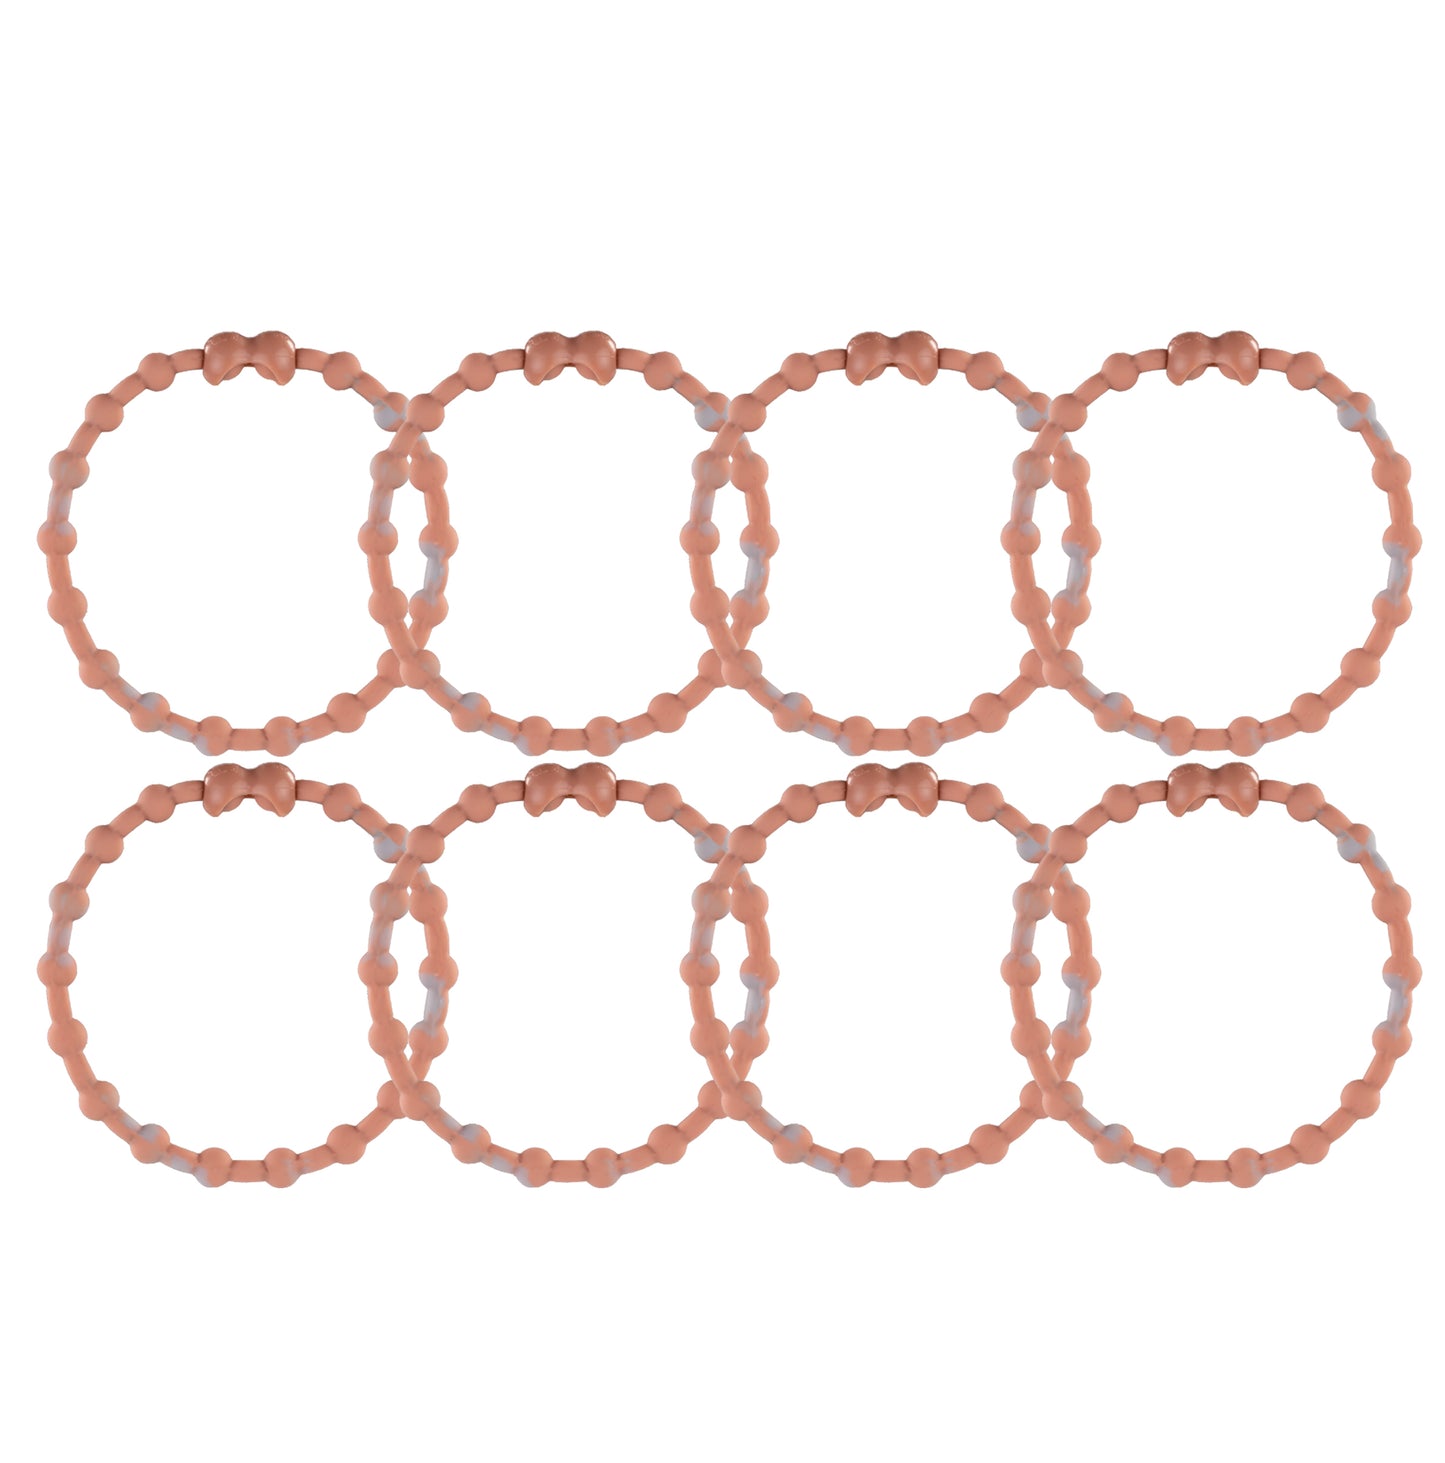 Marble Rose Gold Hair Ties (8 Pack): A Touch of Modern Luxury for Every Look